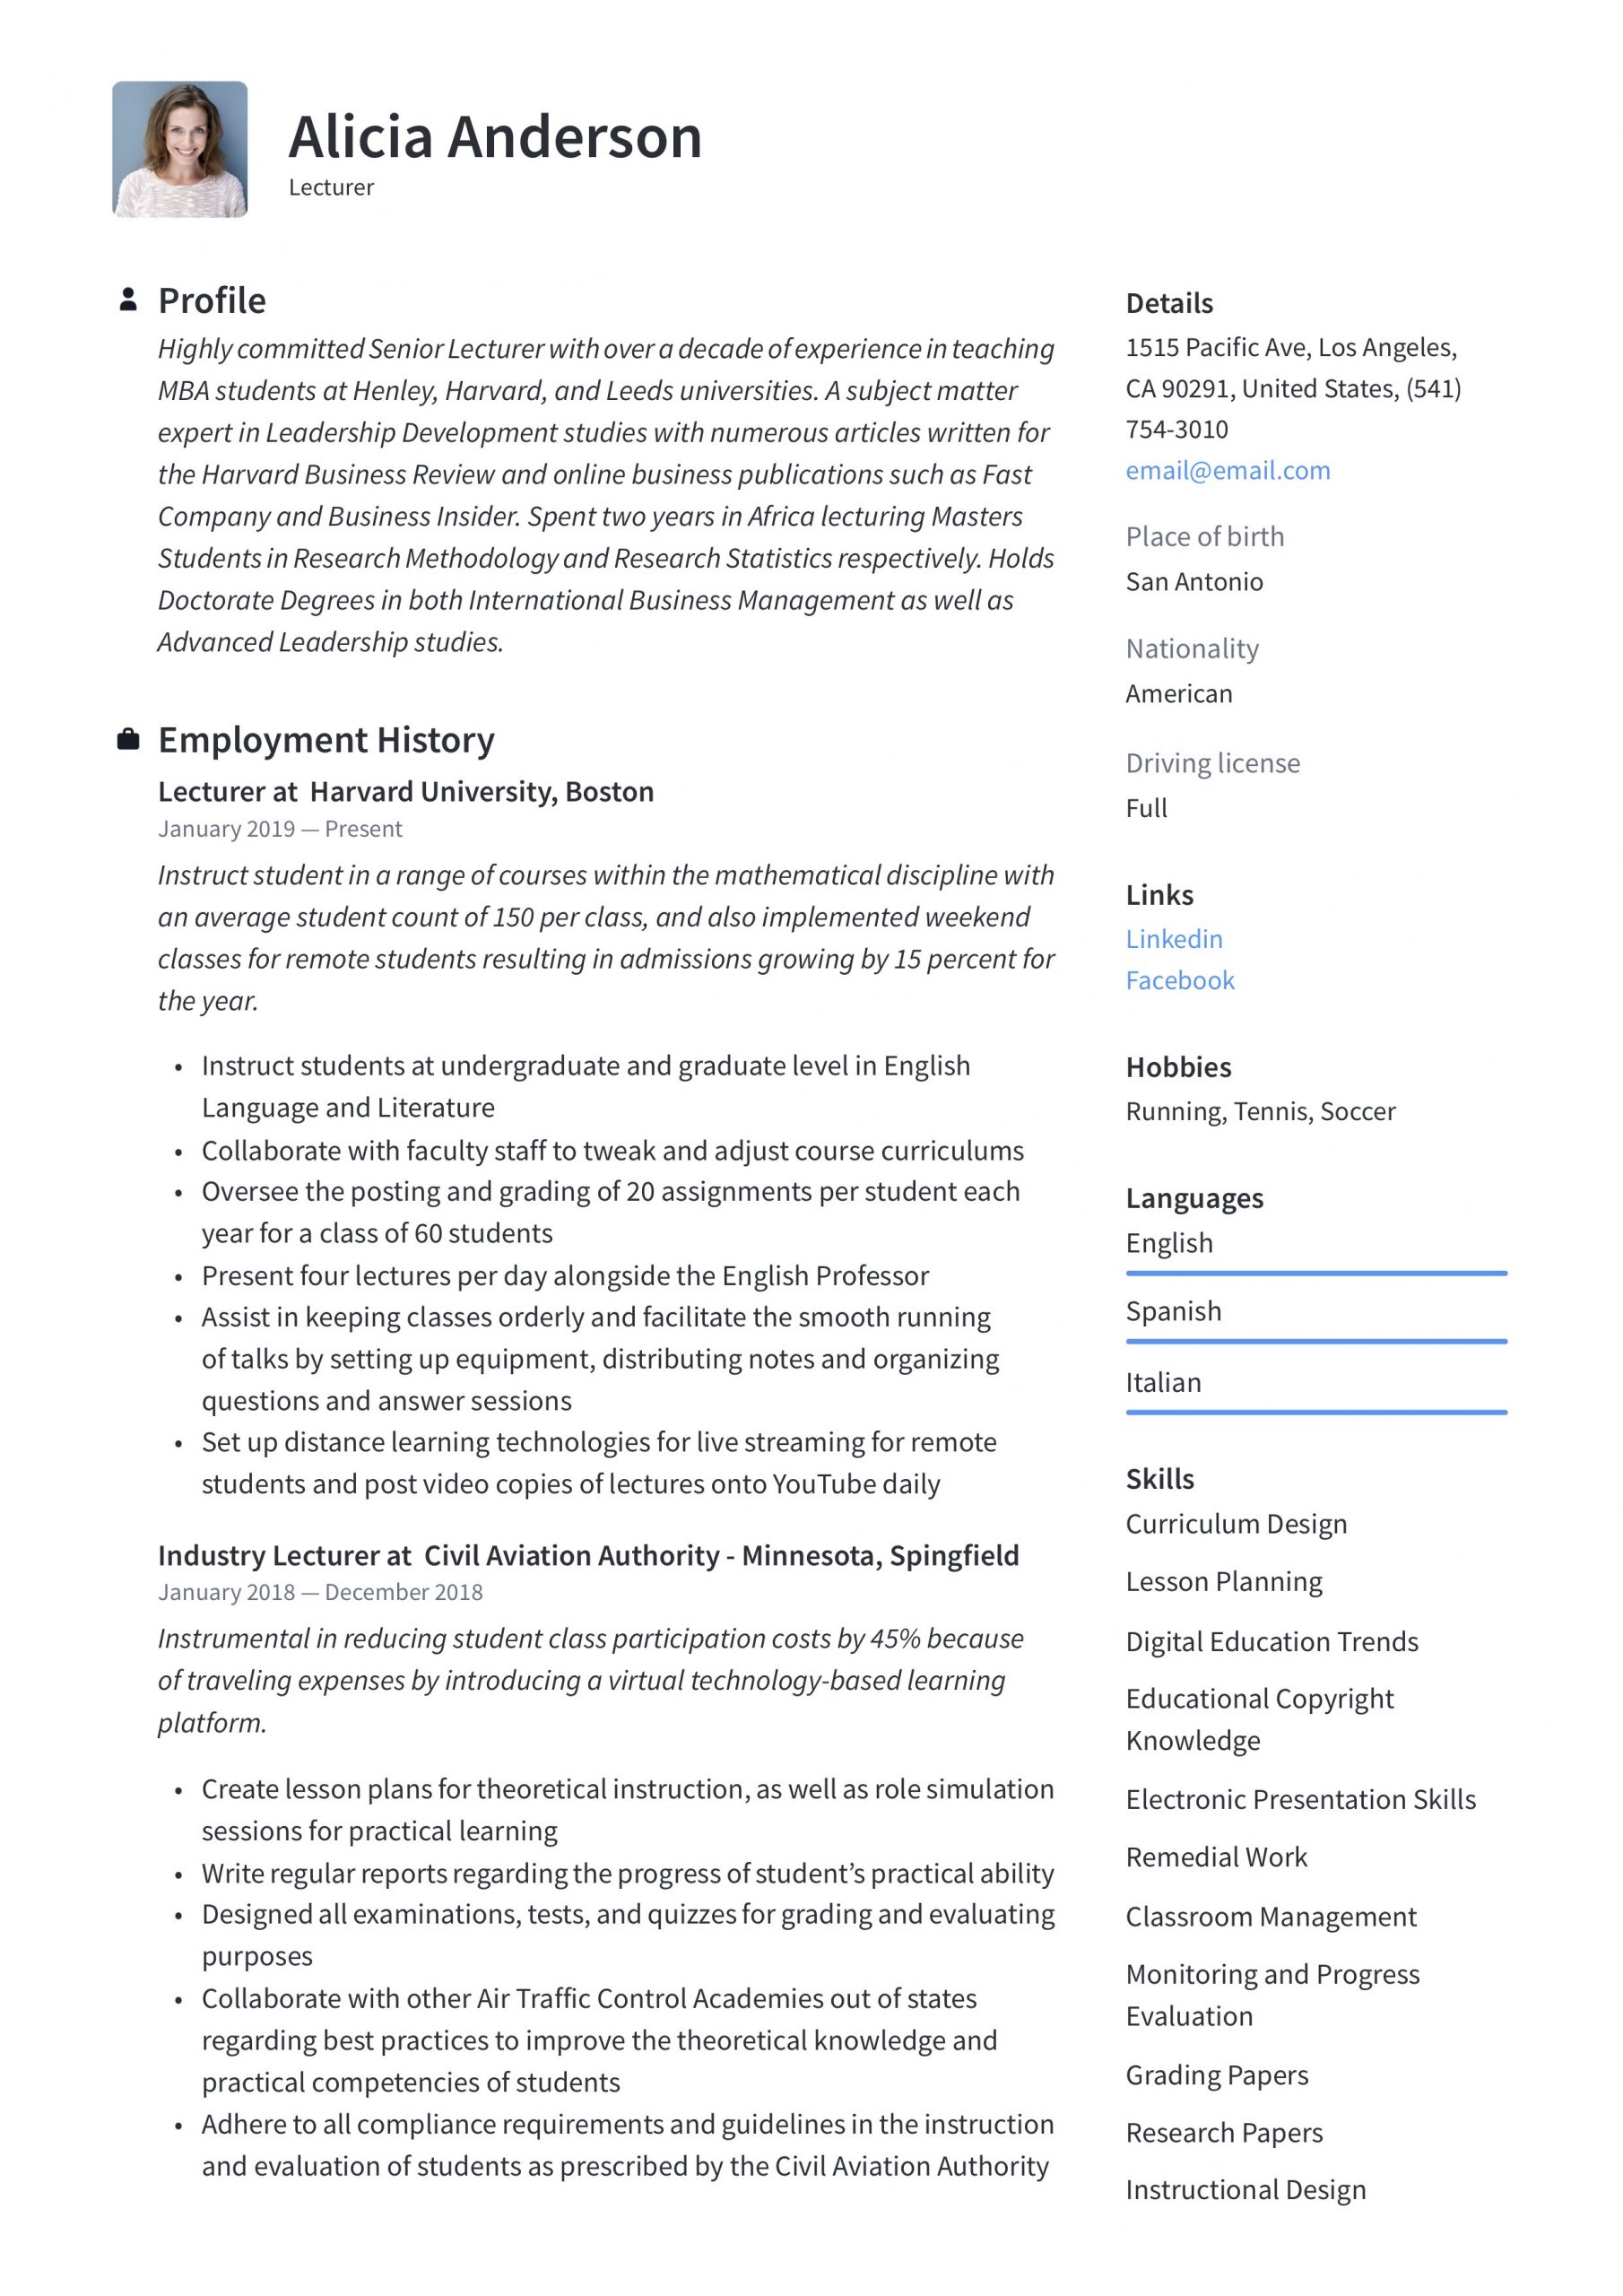 Sample Resume for College Faculty Position Lecturer Resume & Writing Guide  18 Free Examples 2020